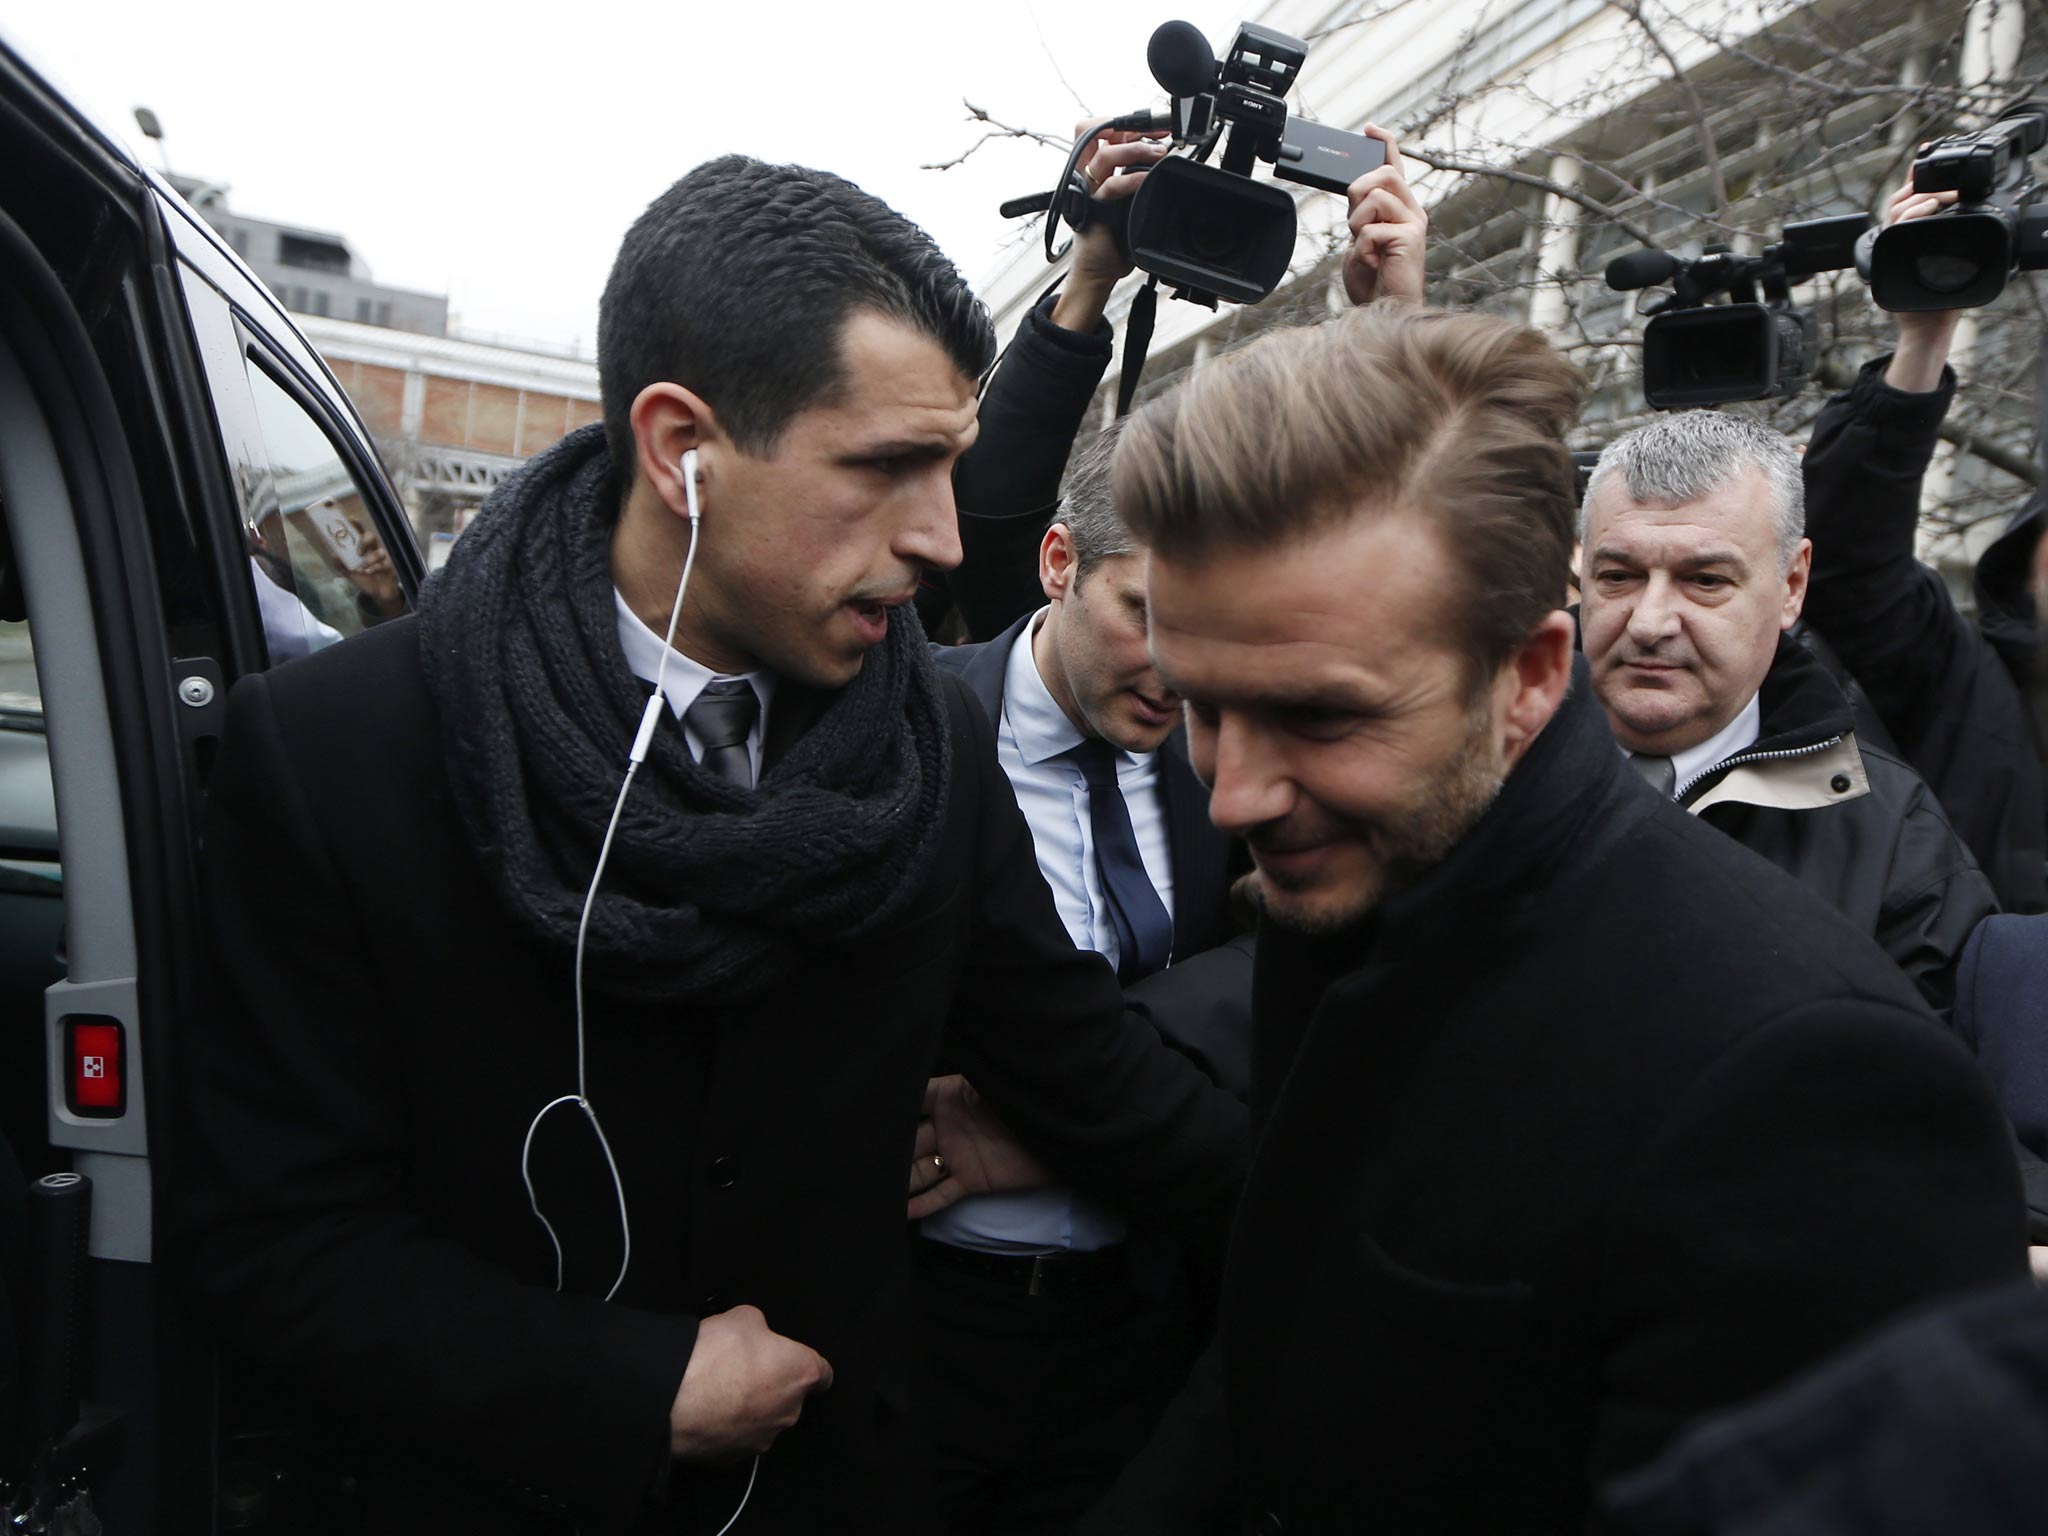 David Beckham is seen at the Pitie-Salpetriere hospital for his medical examination in Paris